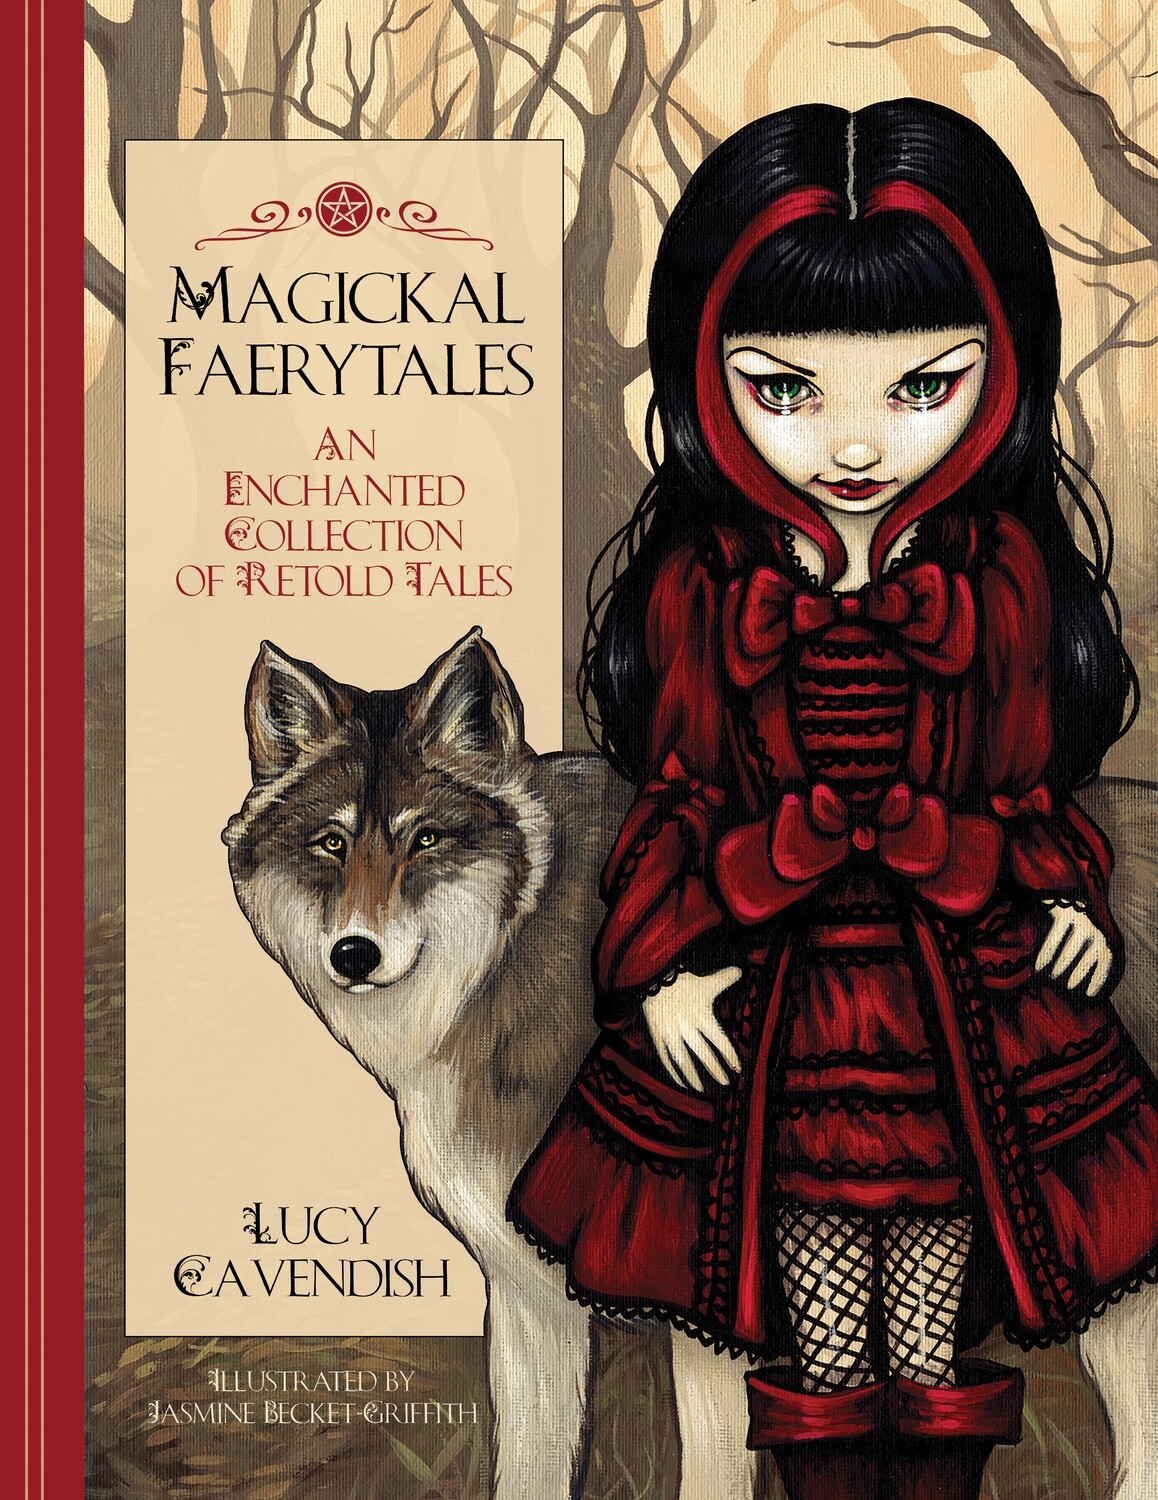 Magickal Faerytales: An Enchanted Collection of Retold Tales